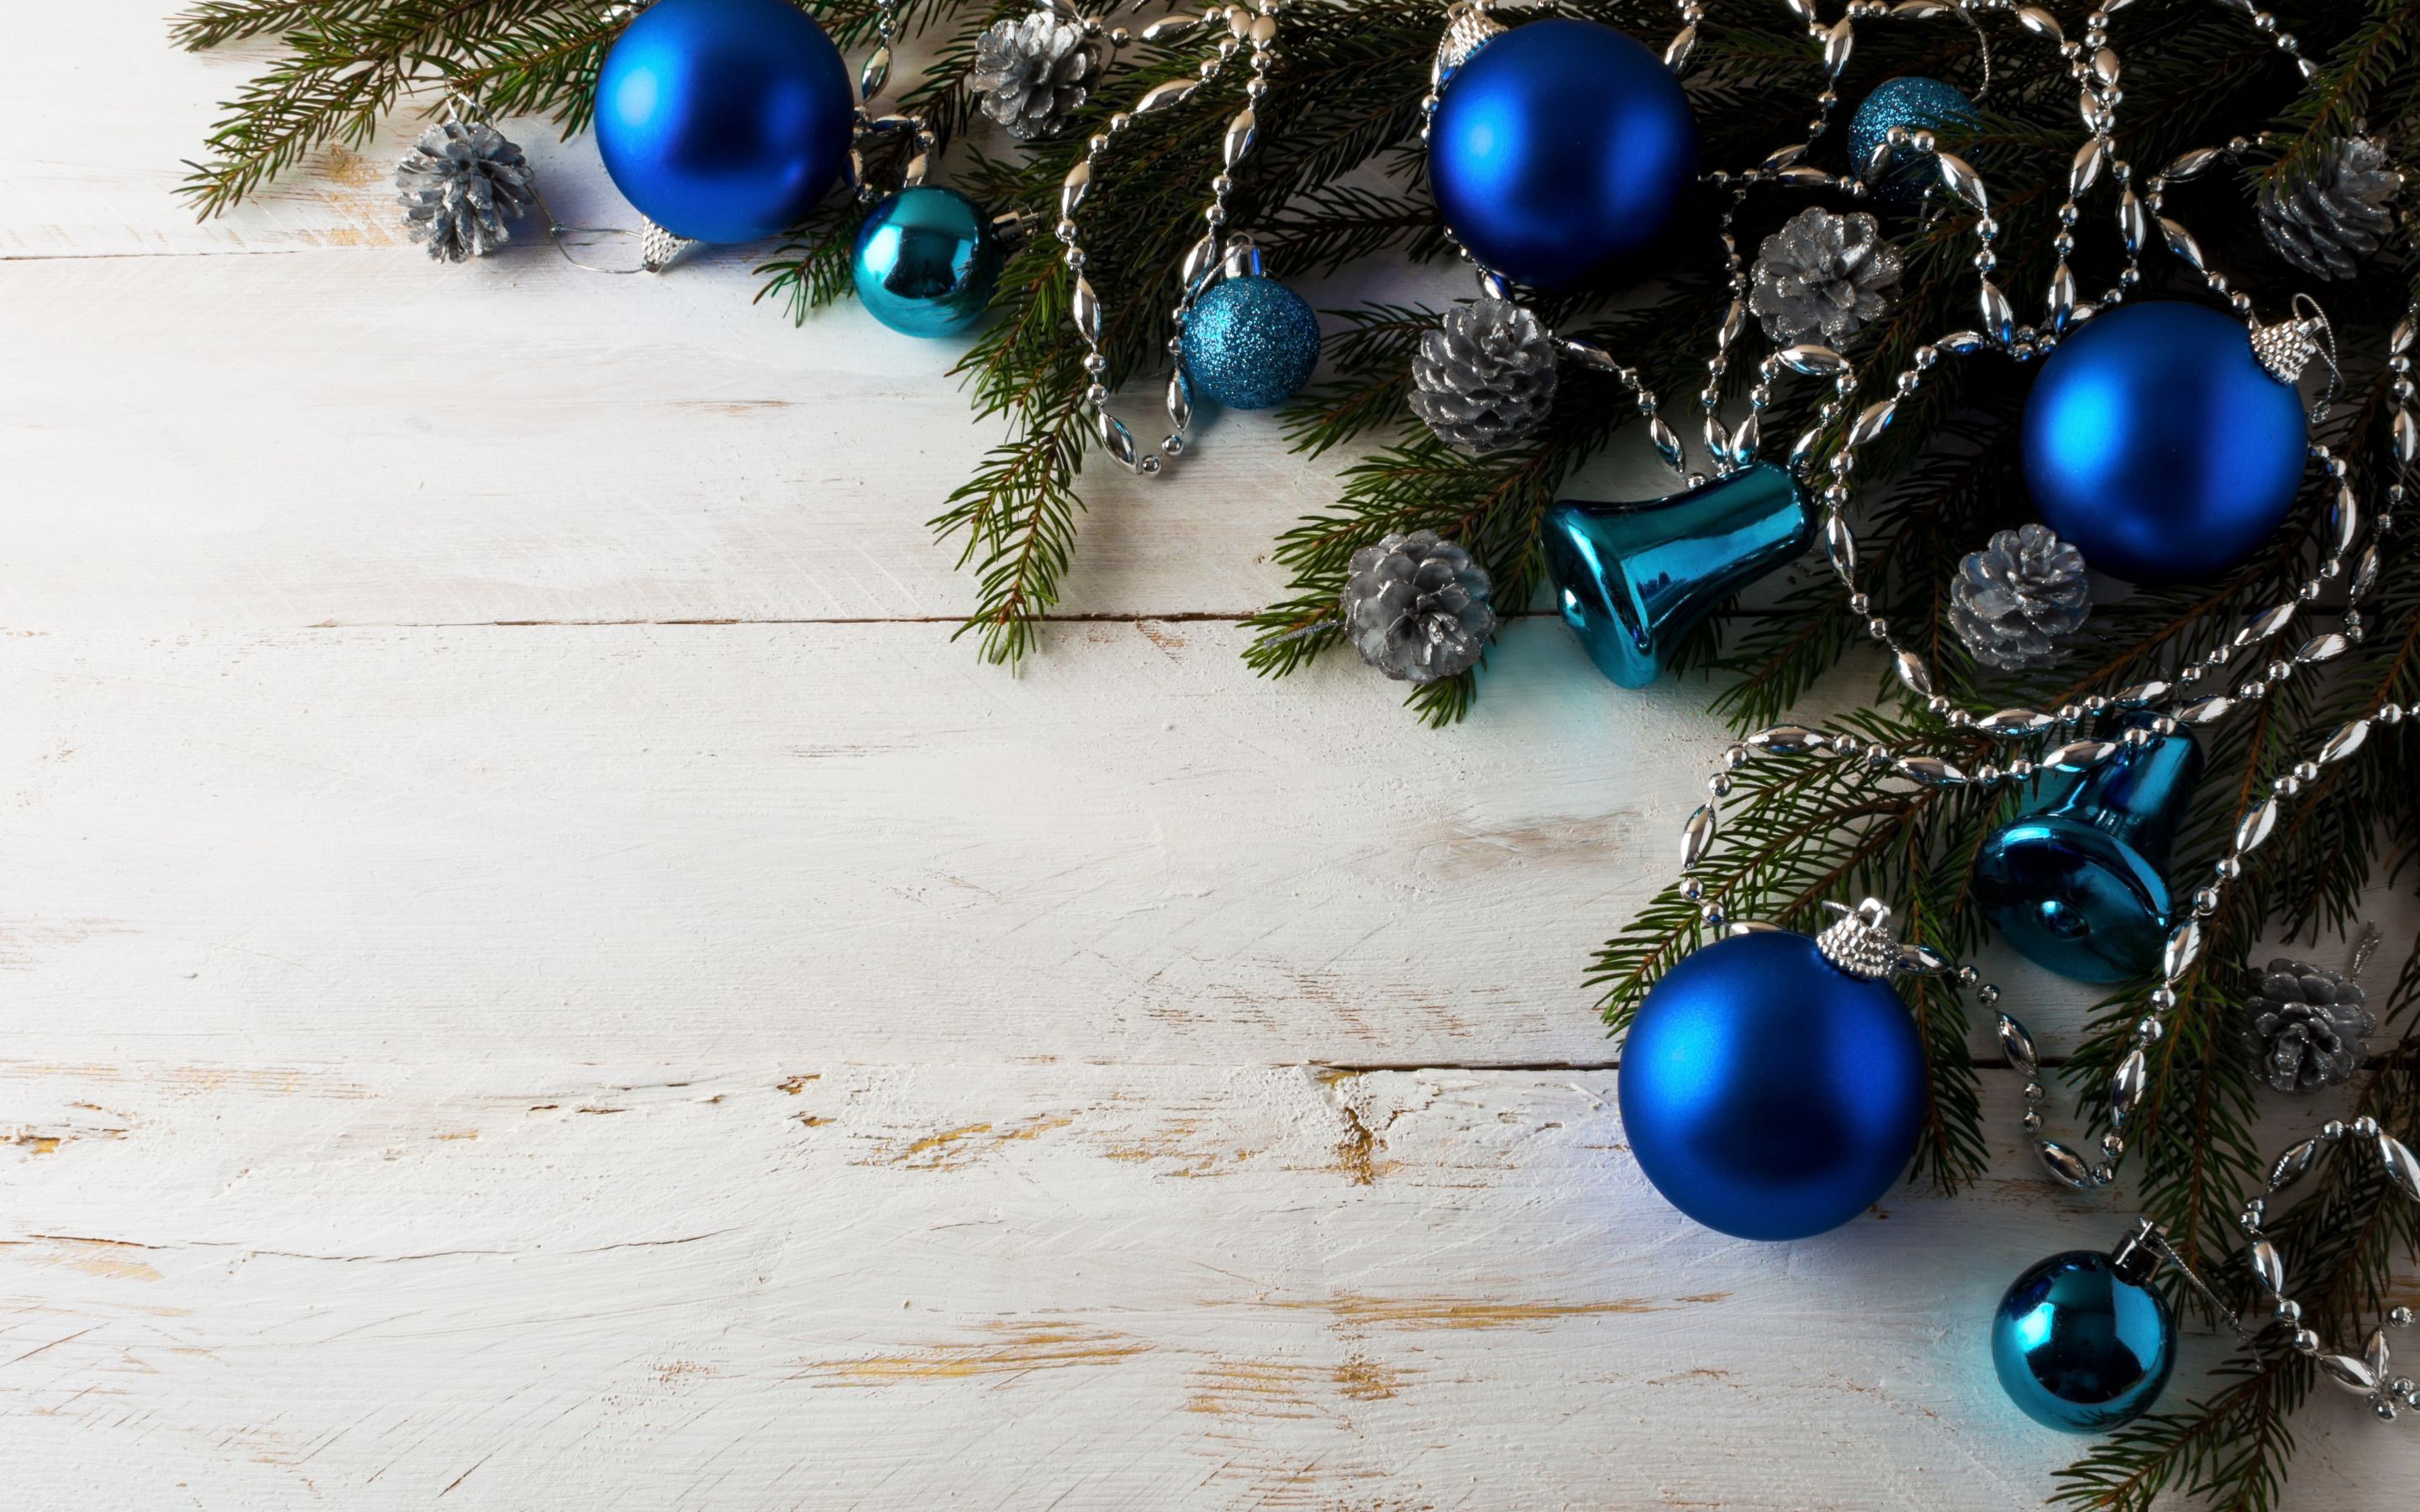 Download wallpaper Blue christmas balls, Happy New Year, Christmas background, Blue Christmas bells, Christmas, white wood texture for desktop with resolution 2880x1800. High Quality HD picture wallpaper